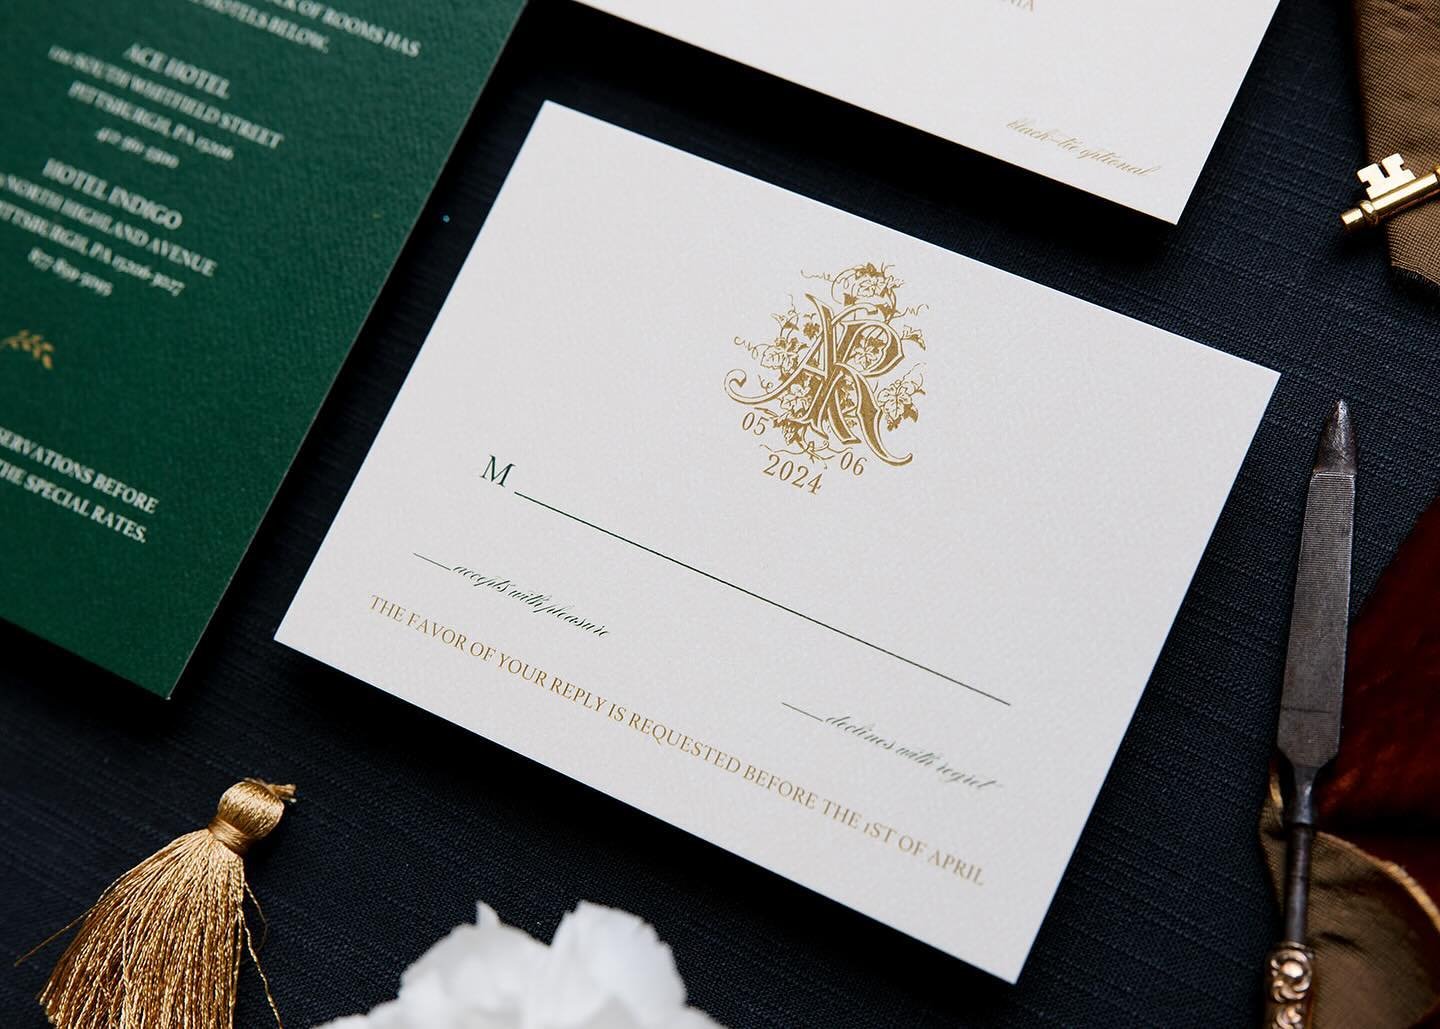 Let me create a Custom Monogram for your wedding! Not only are #monograms perfect on your invitation suite, but they can be carried out throughout the entire wedding celebration and beyond.